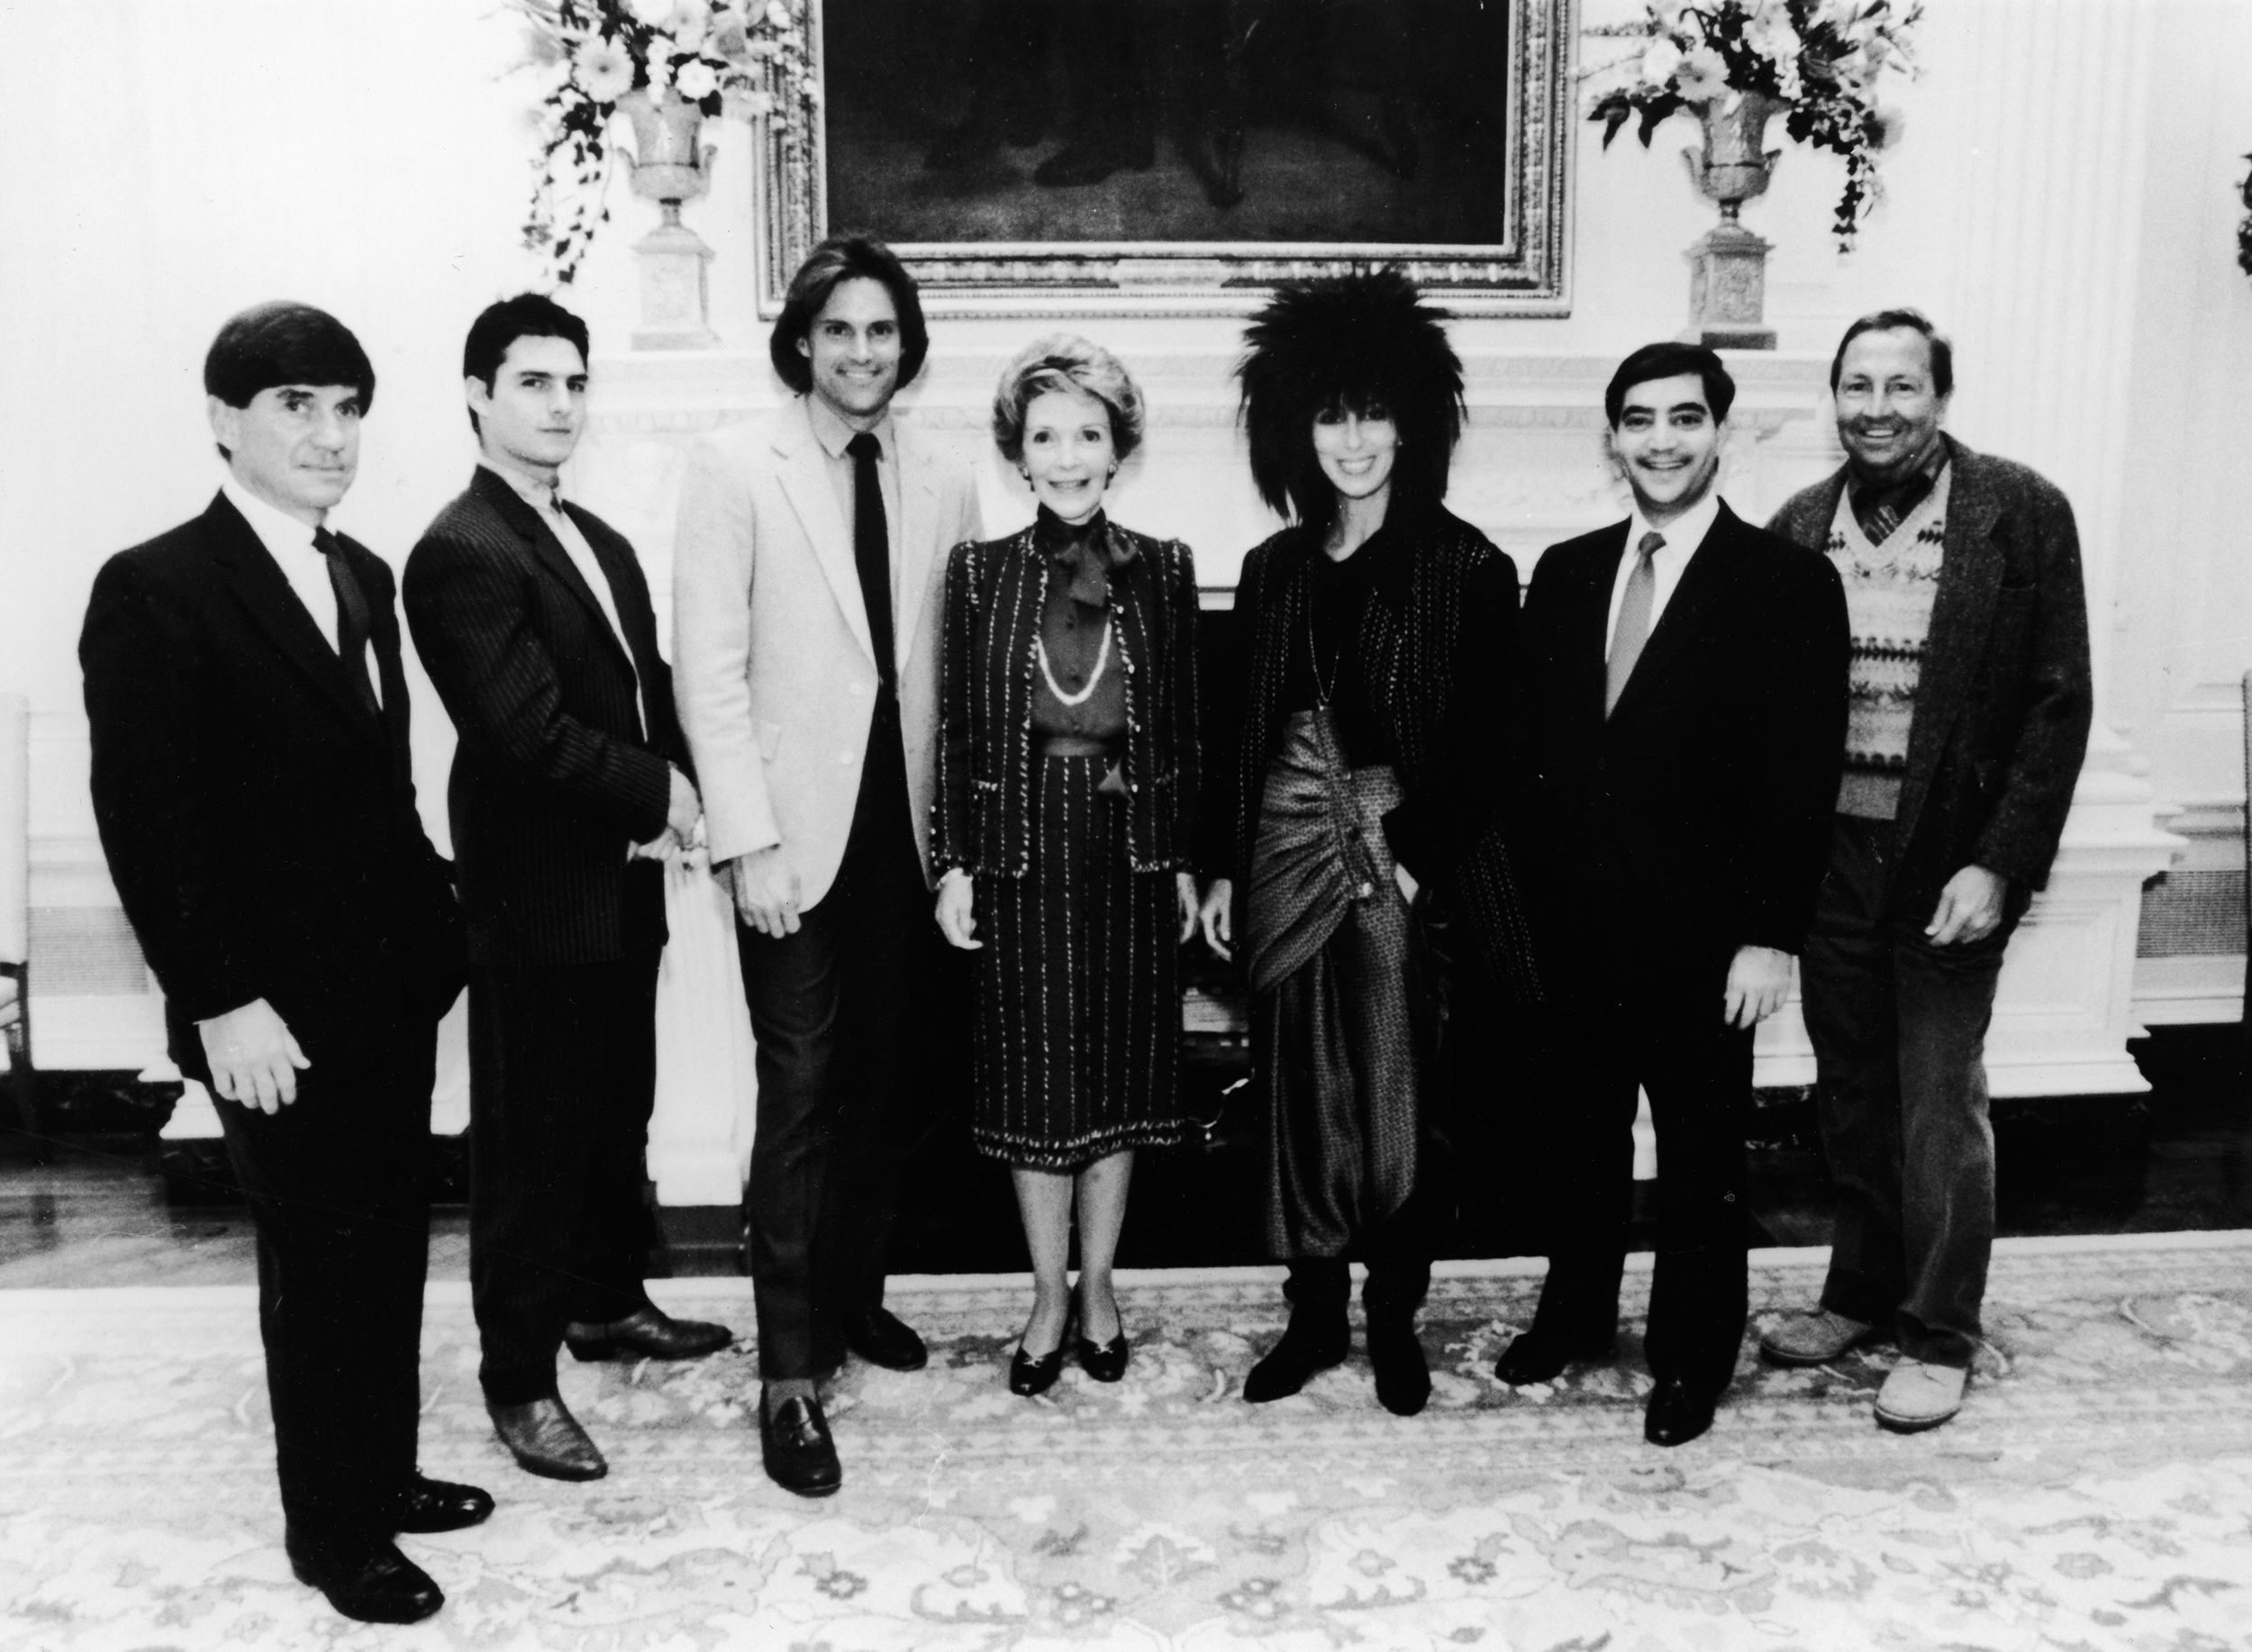 Nancy Reagan poses with celebrity recipients of the Outstanding Learning Disabled Achiever Award, Chris Anderson, Tom Cruise, Caitlyn Jenner (formerly Bruce Jenner), Cher, Richard C. Strauss, and Robert Rauchenberg, at the White House in  Washington, D.C. in October 1985.